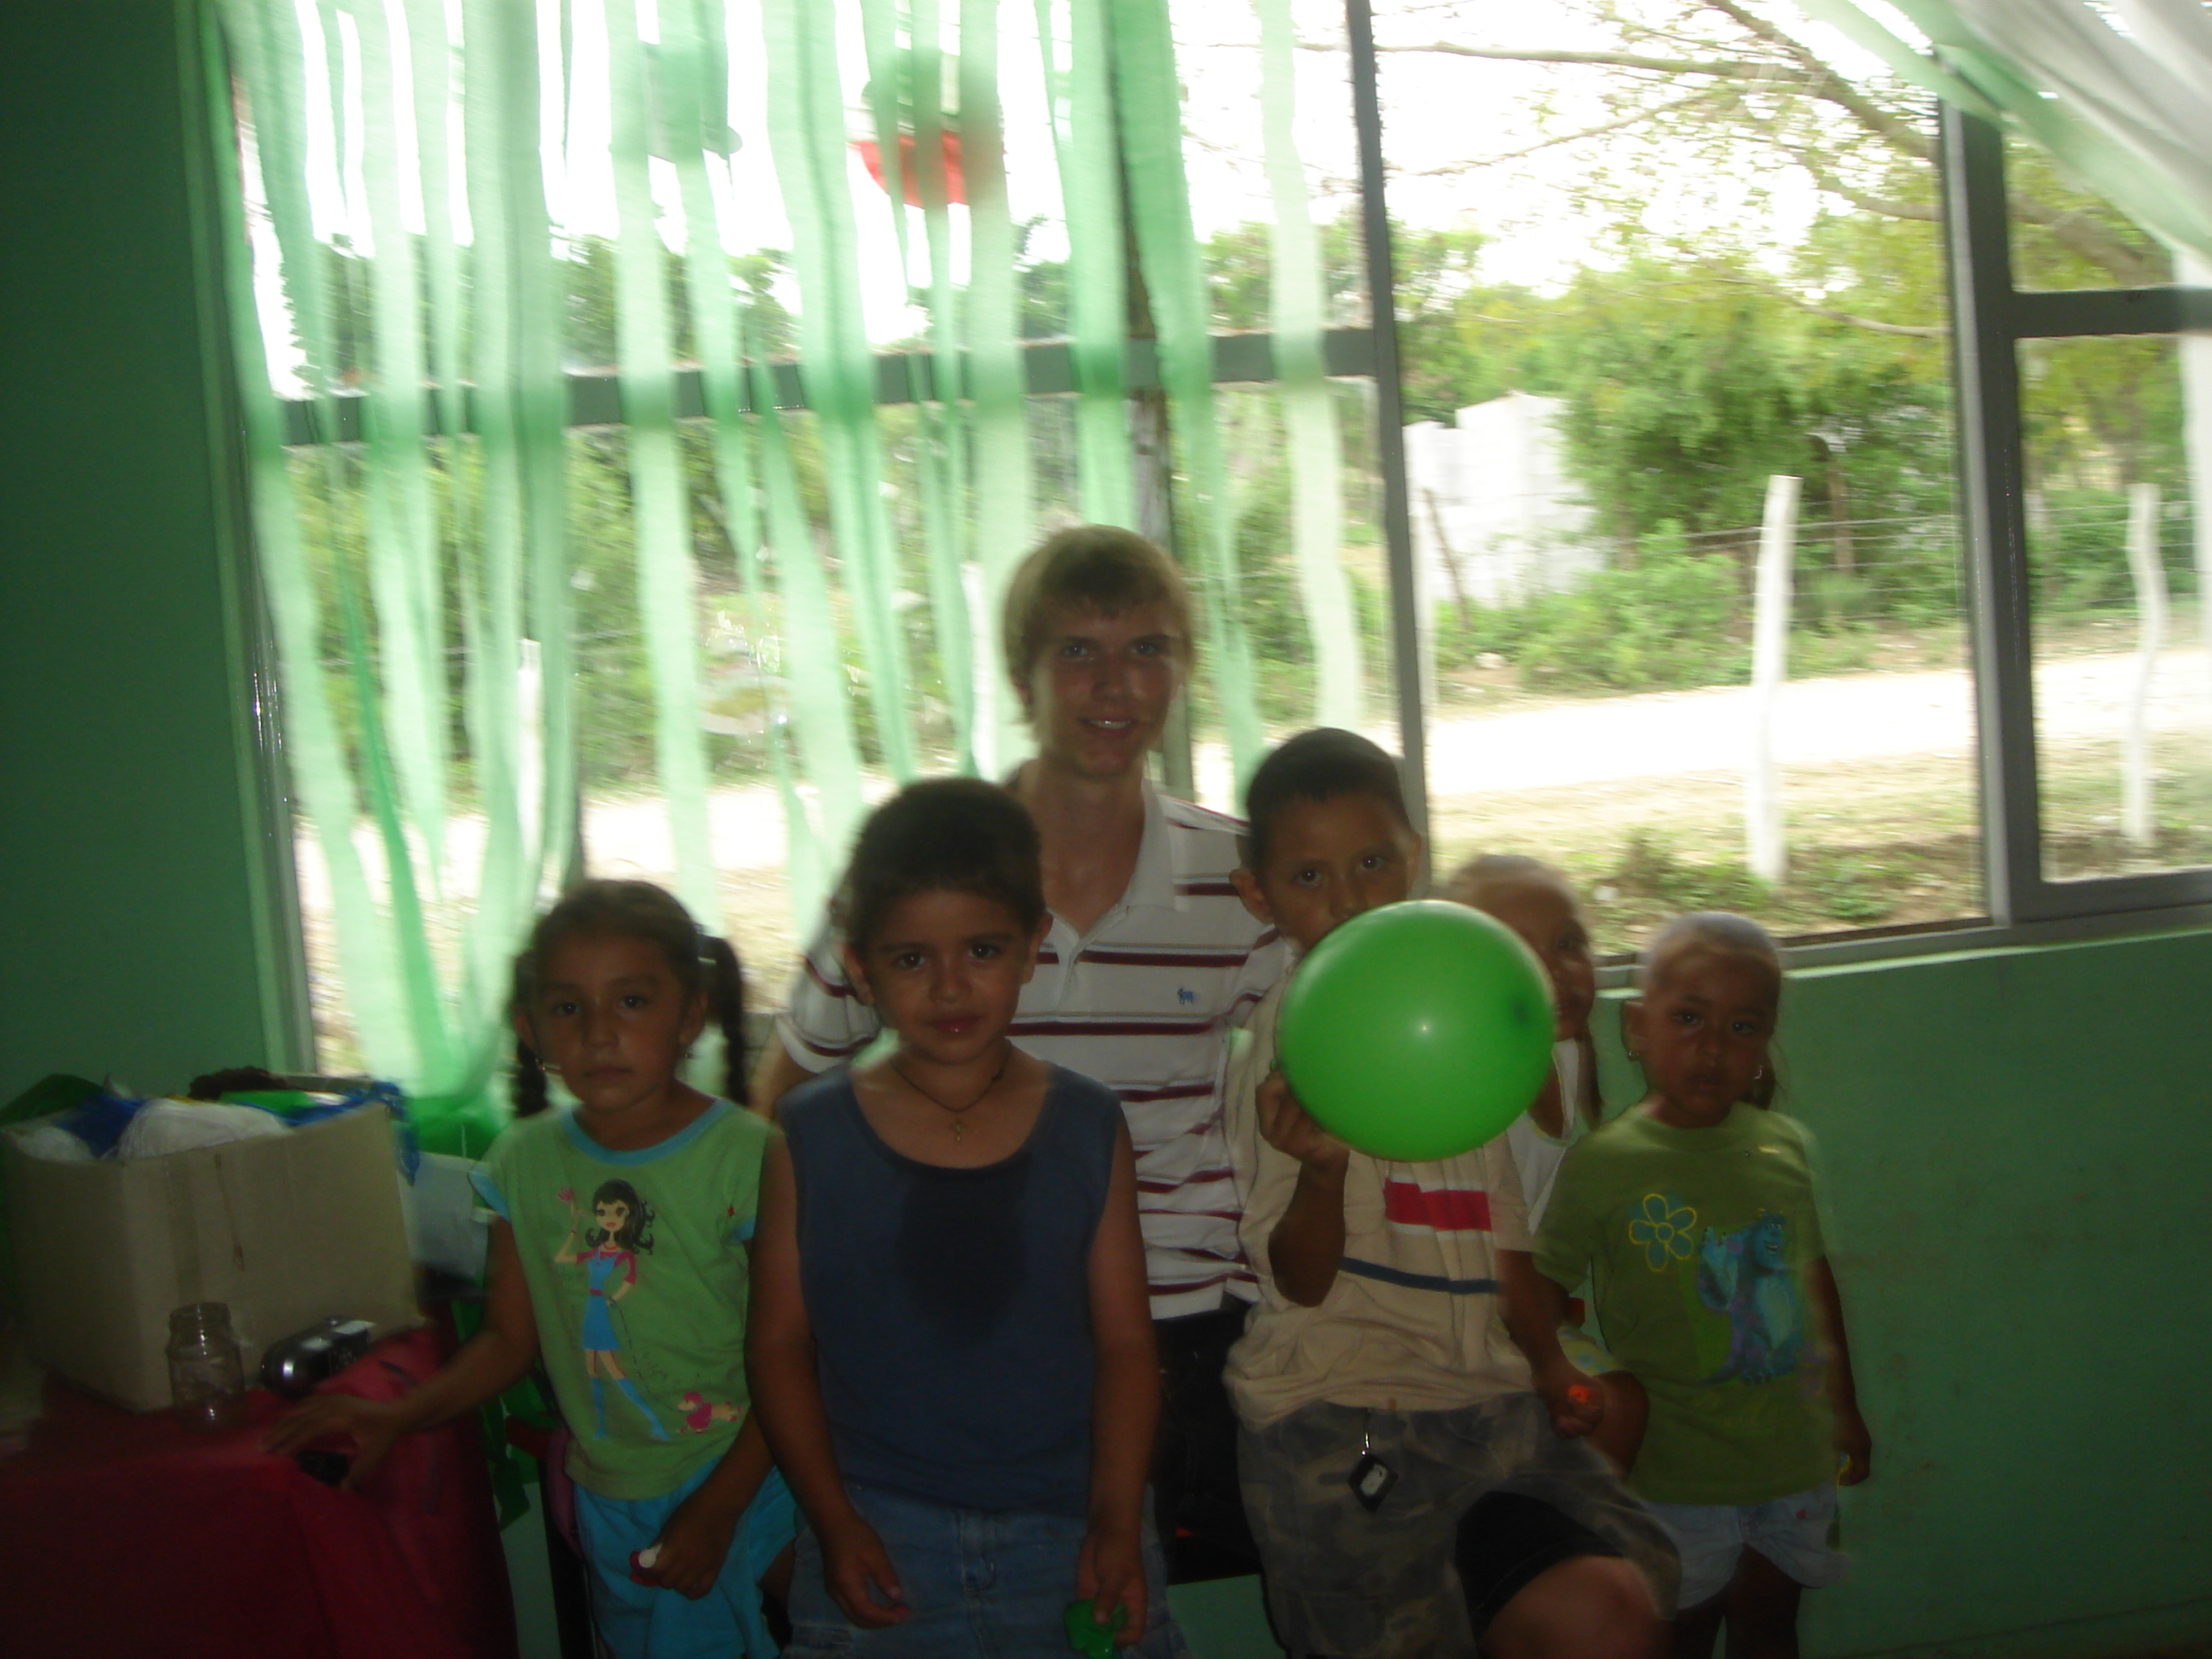 Aaron and some Mexican children